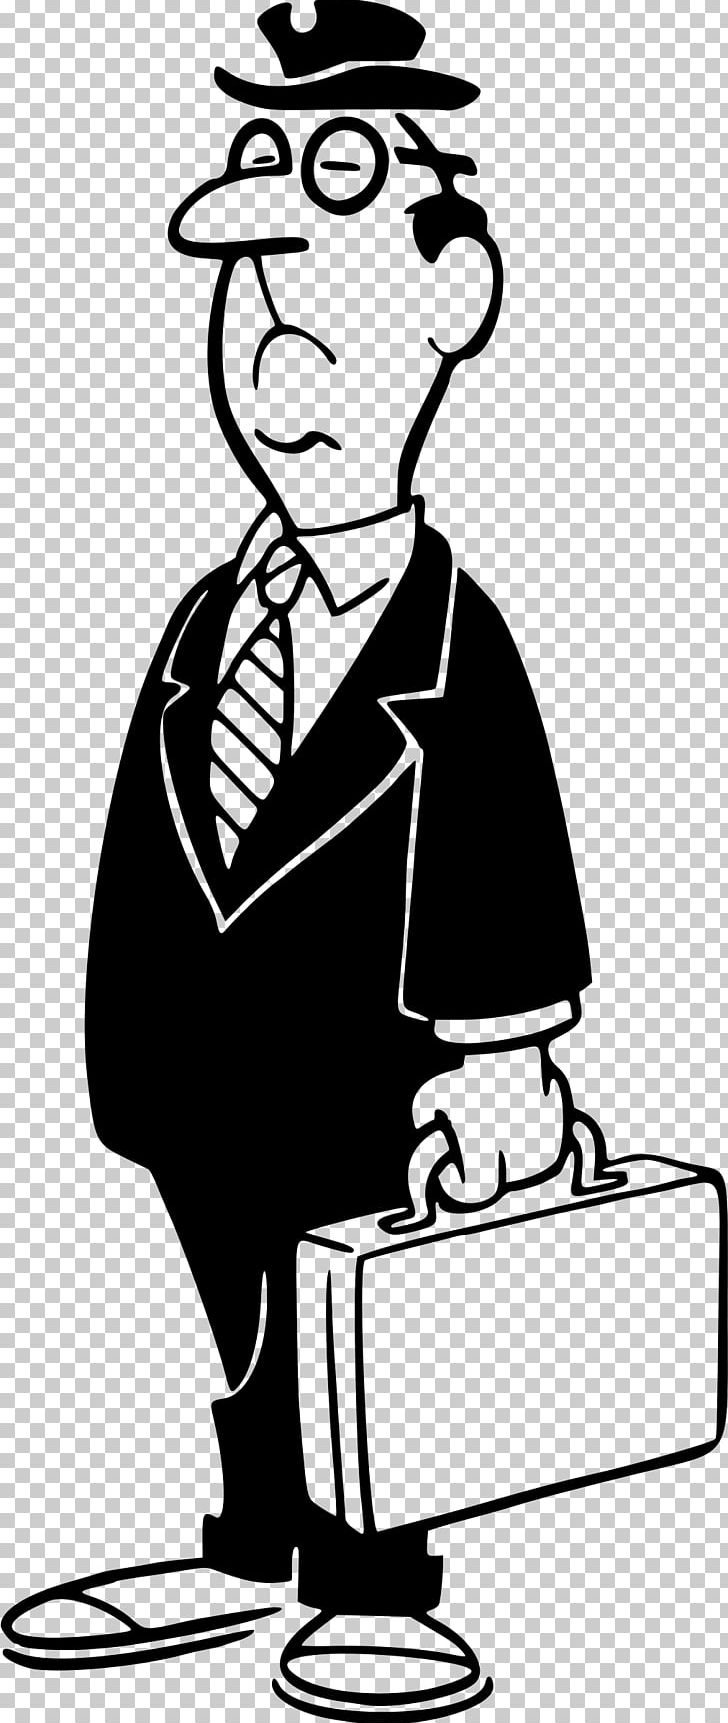 Businessperson PNG, Clipart, Avatar, Black, Black And White, Business, Business Magnate Free PNG Download